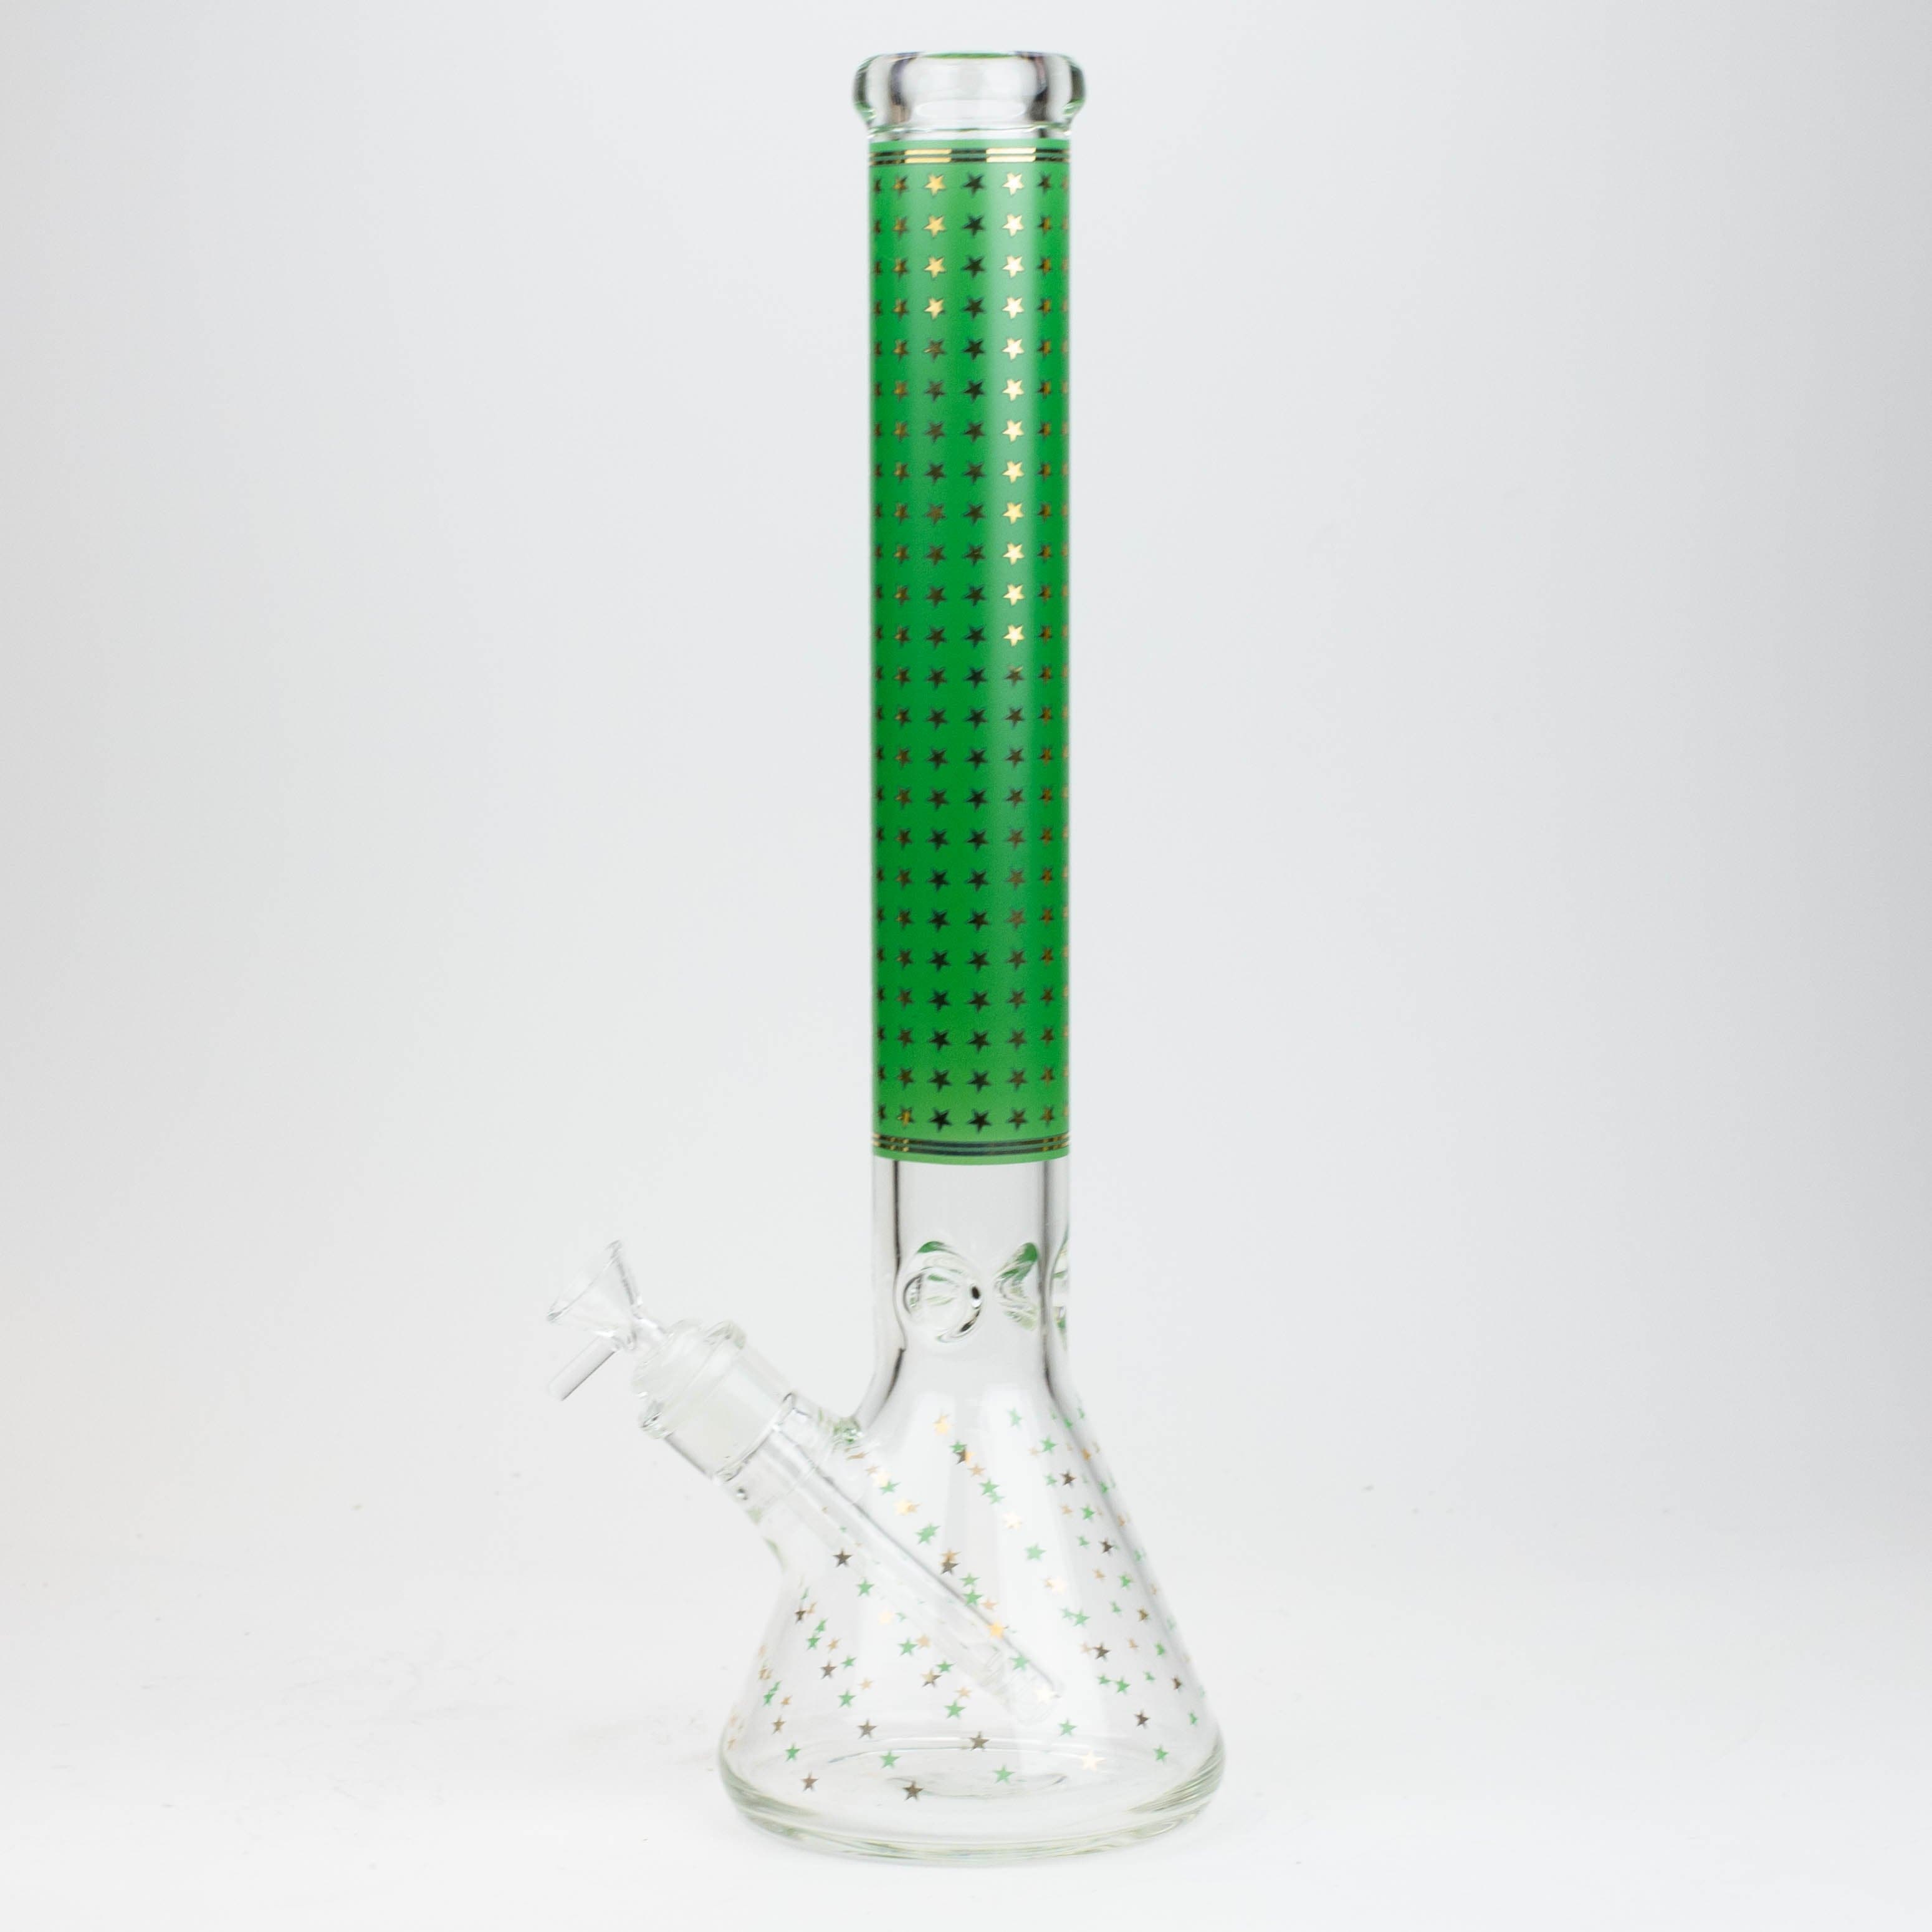 Star 7 mm glass water pipes 17.5"_5